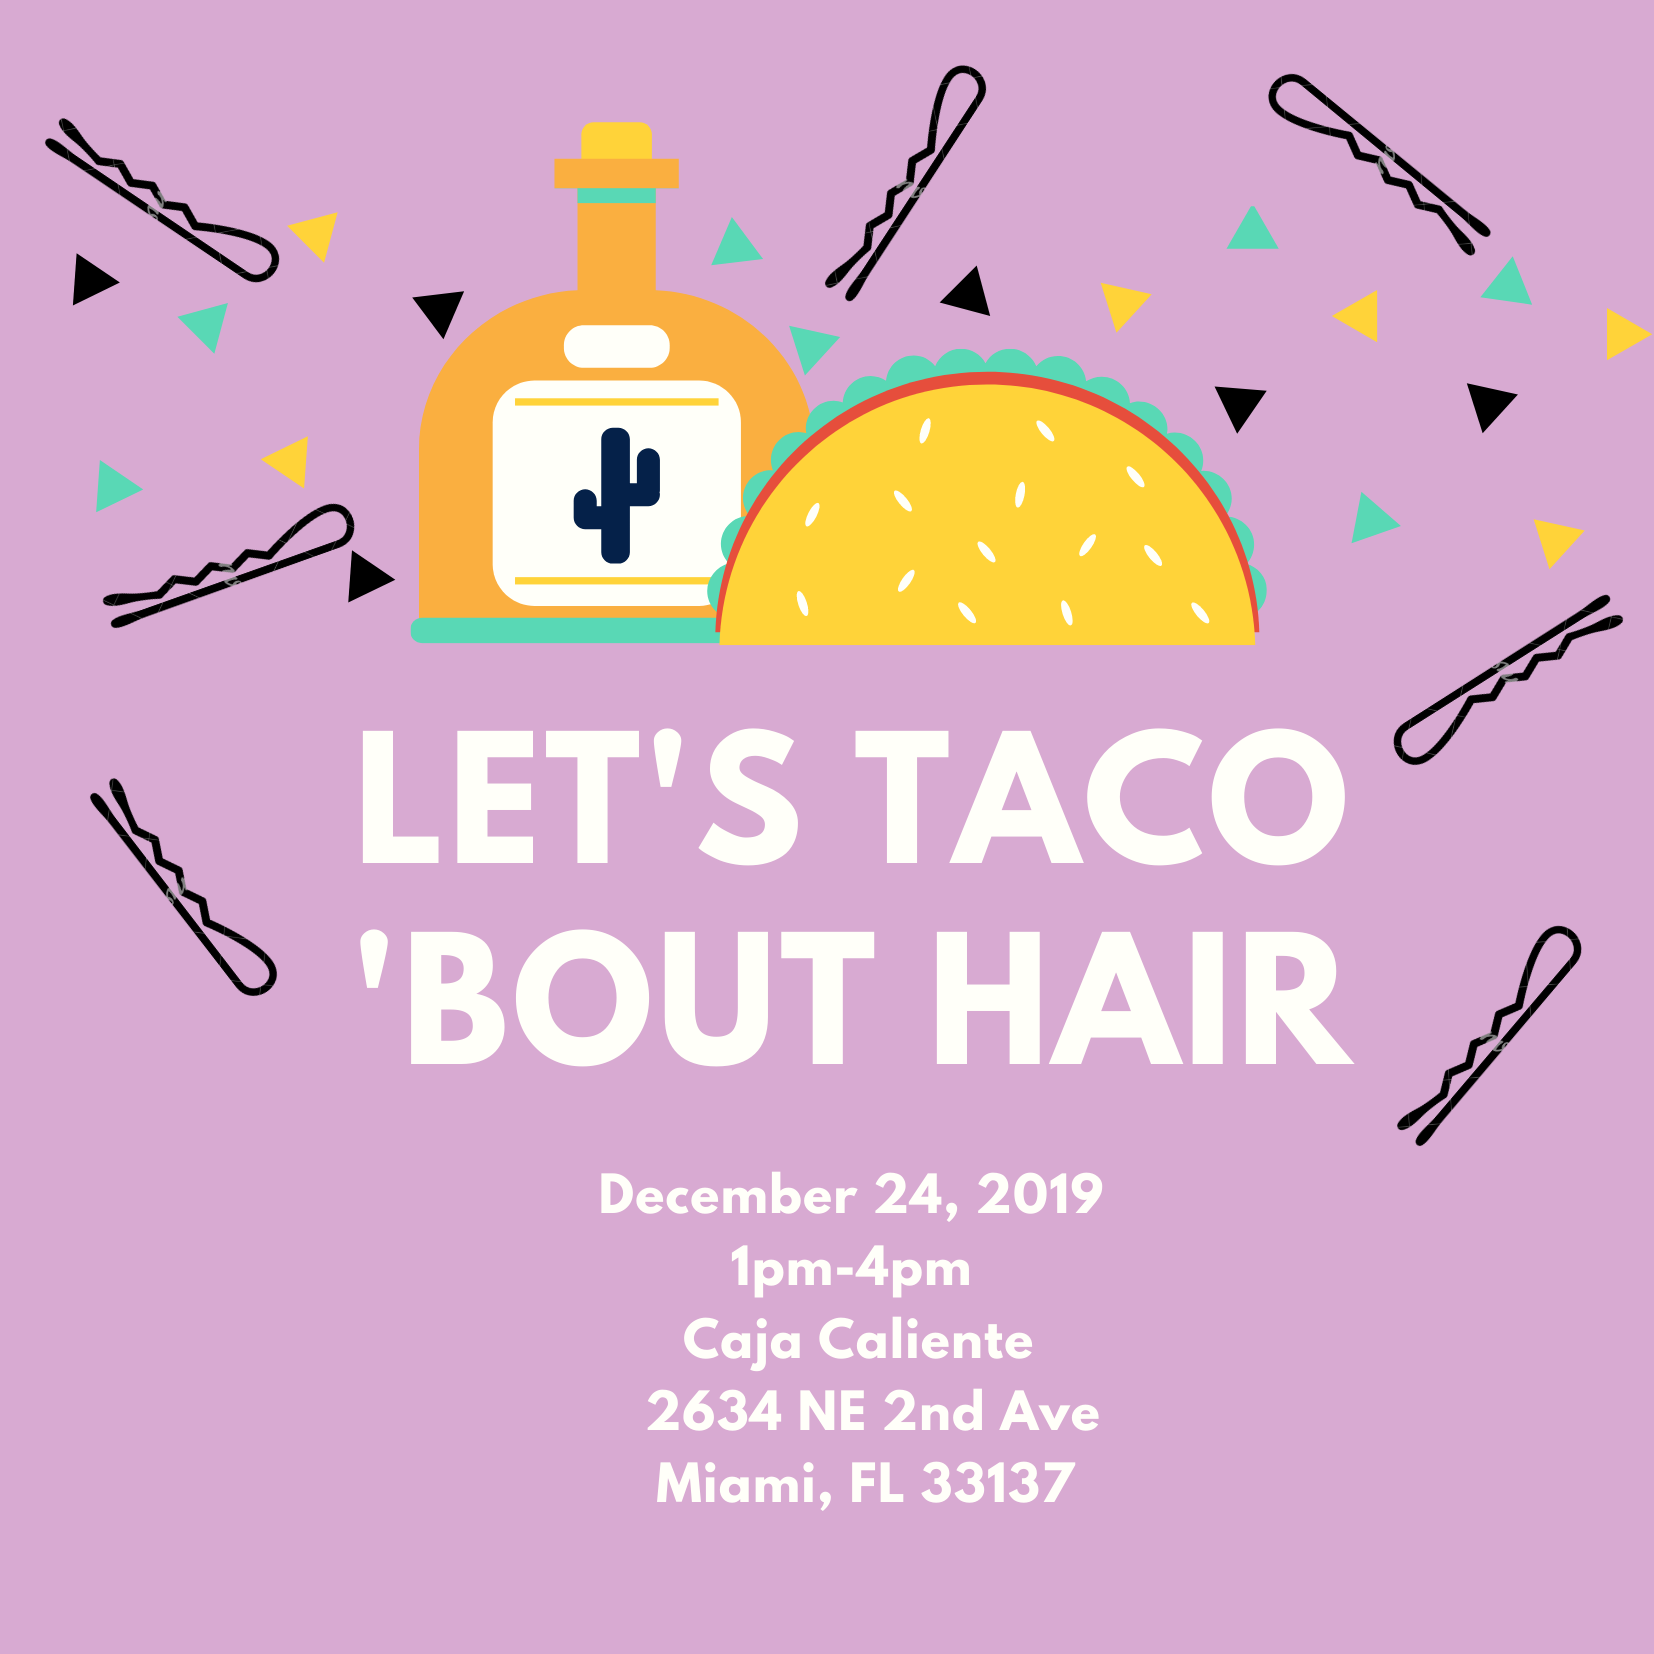 Let's Taco 'Bout Hair!